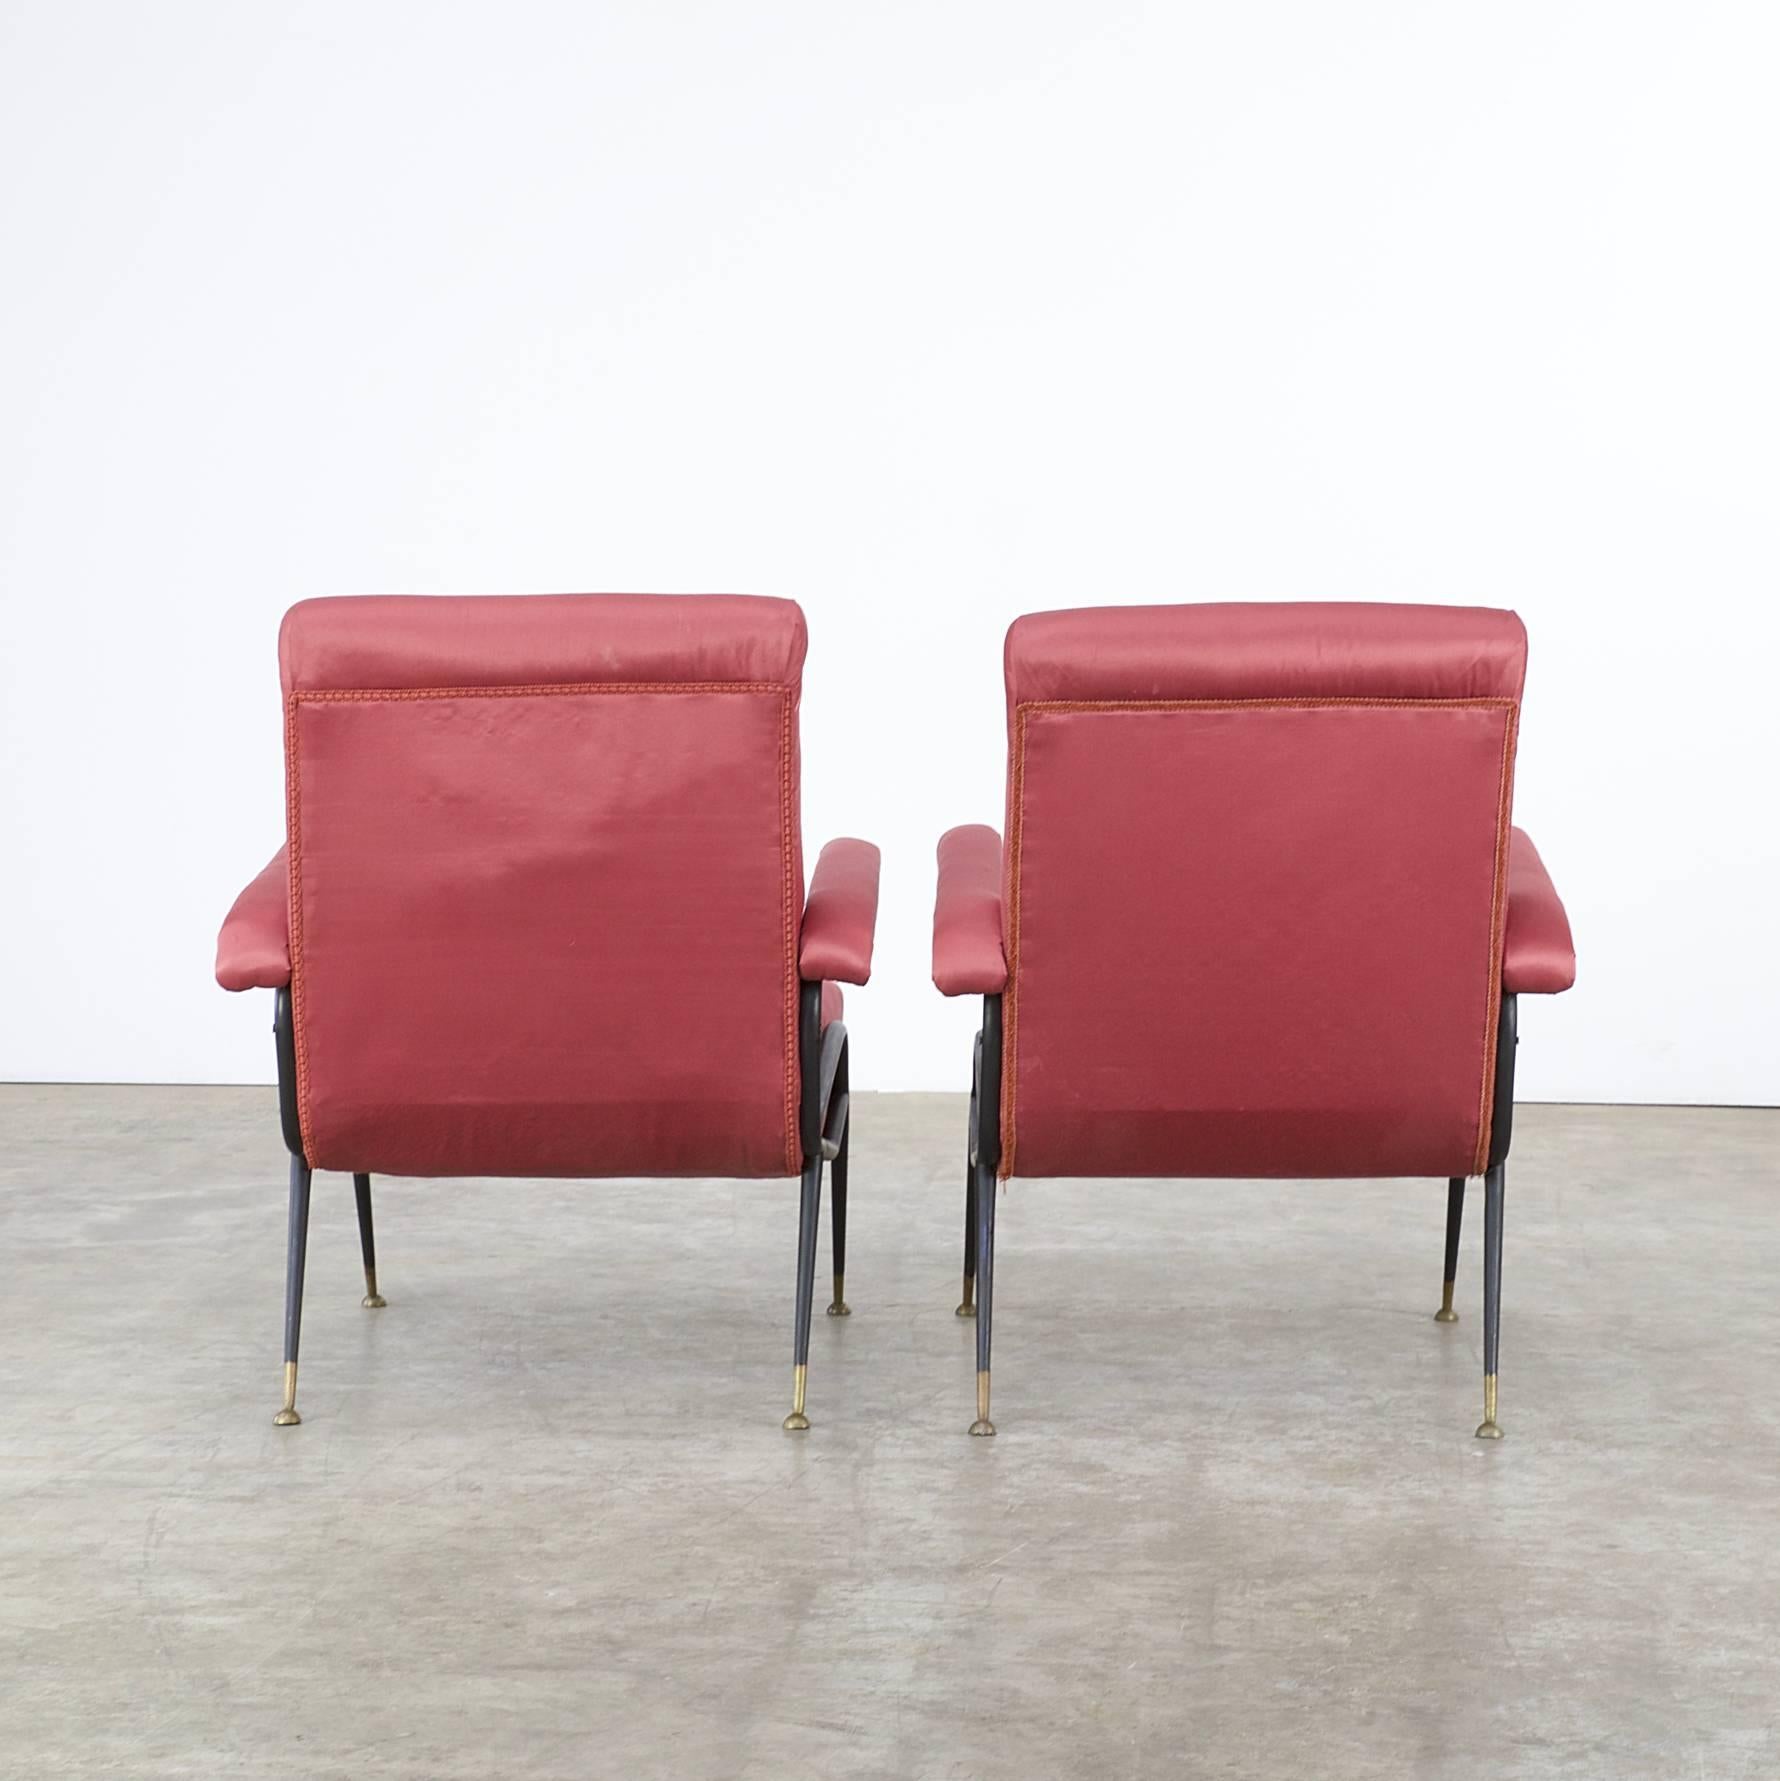 1960s Italian Design Chair in Old Red Fabric, Set of Two For Sale 1